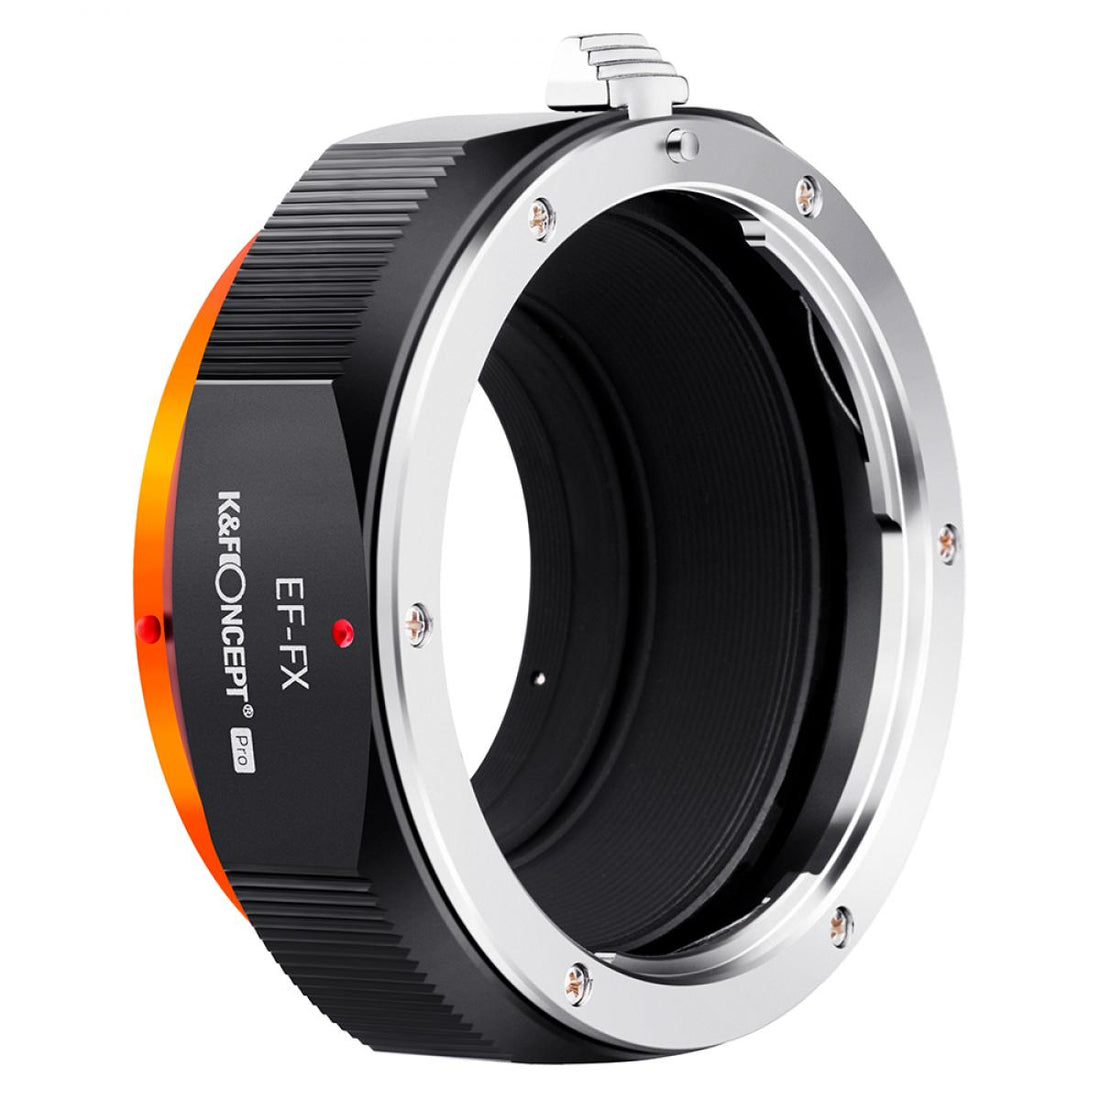 K&amp;F Concept M12115 PRO Lens Adapter for Canon EOS EF to Fuji FX - KF06-450